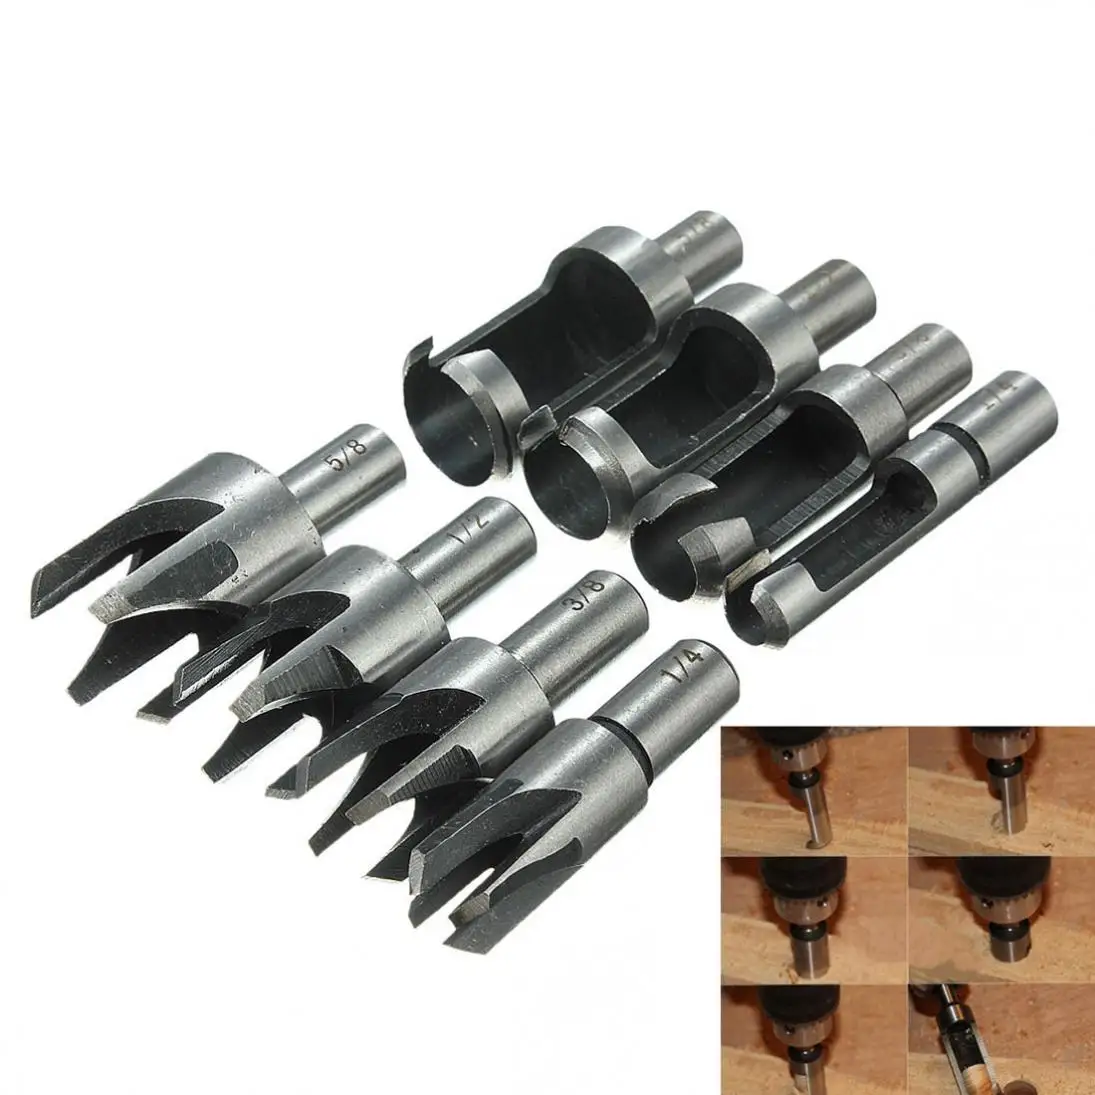 4 x Carbon Steel Plug Cutter Cutting Power Tool Drills Bits Set For Woodworking 